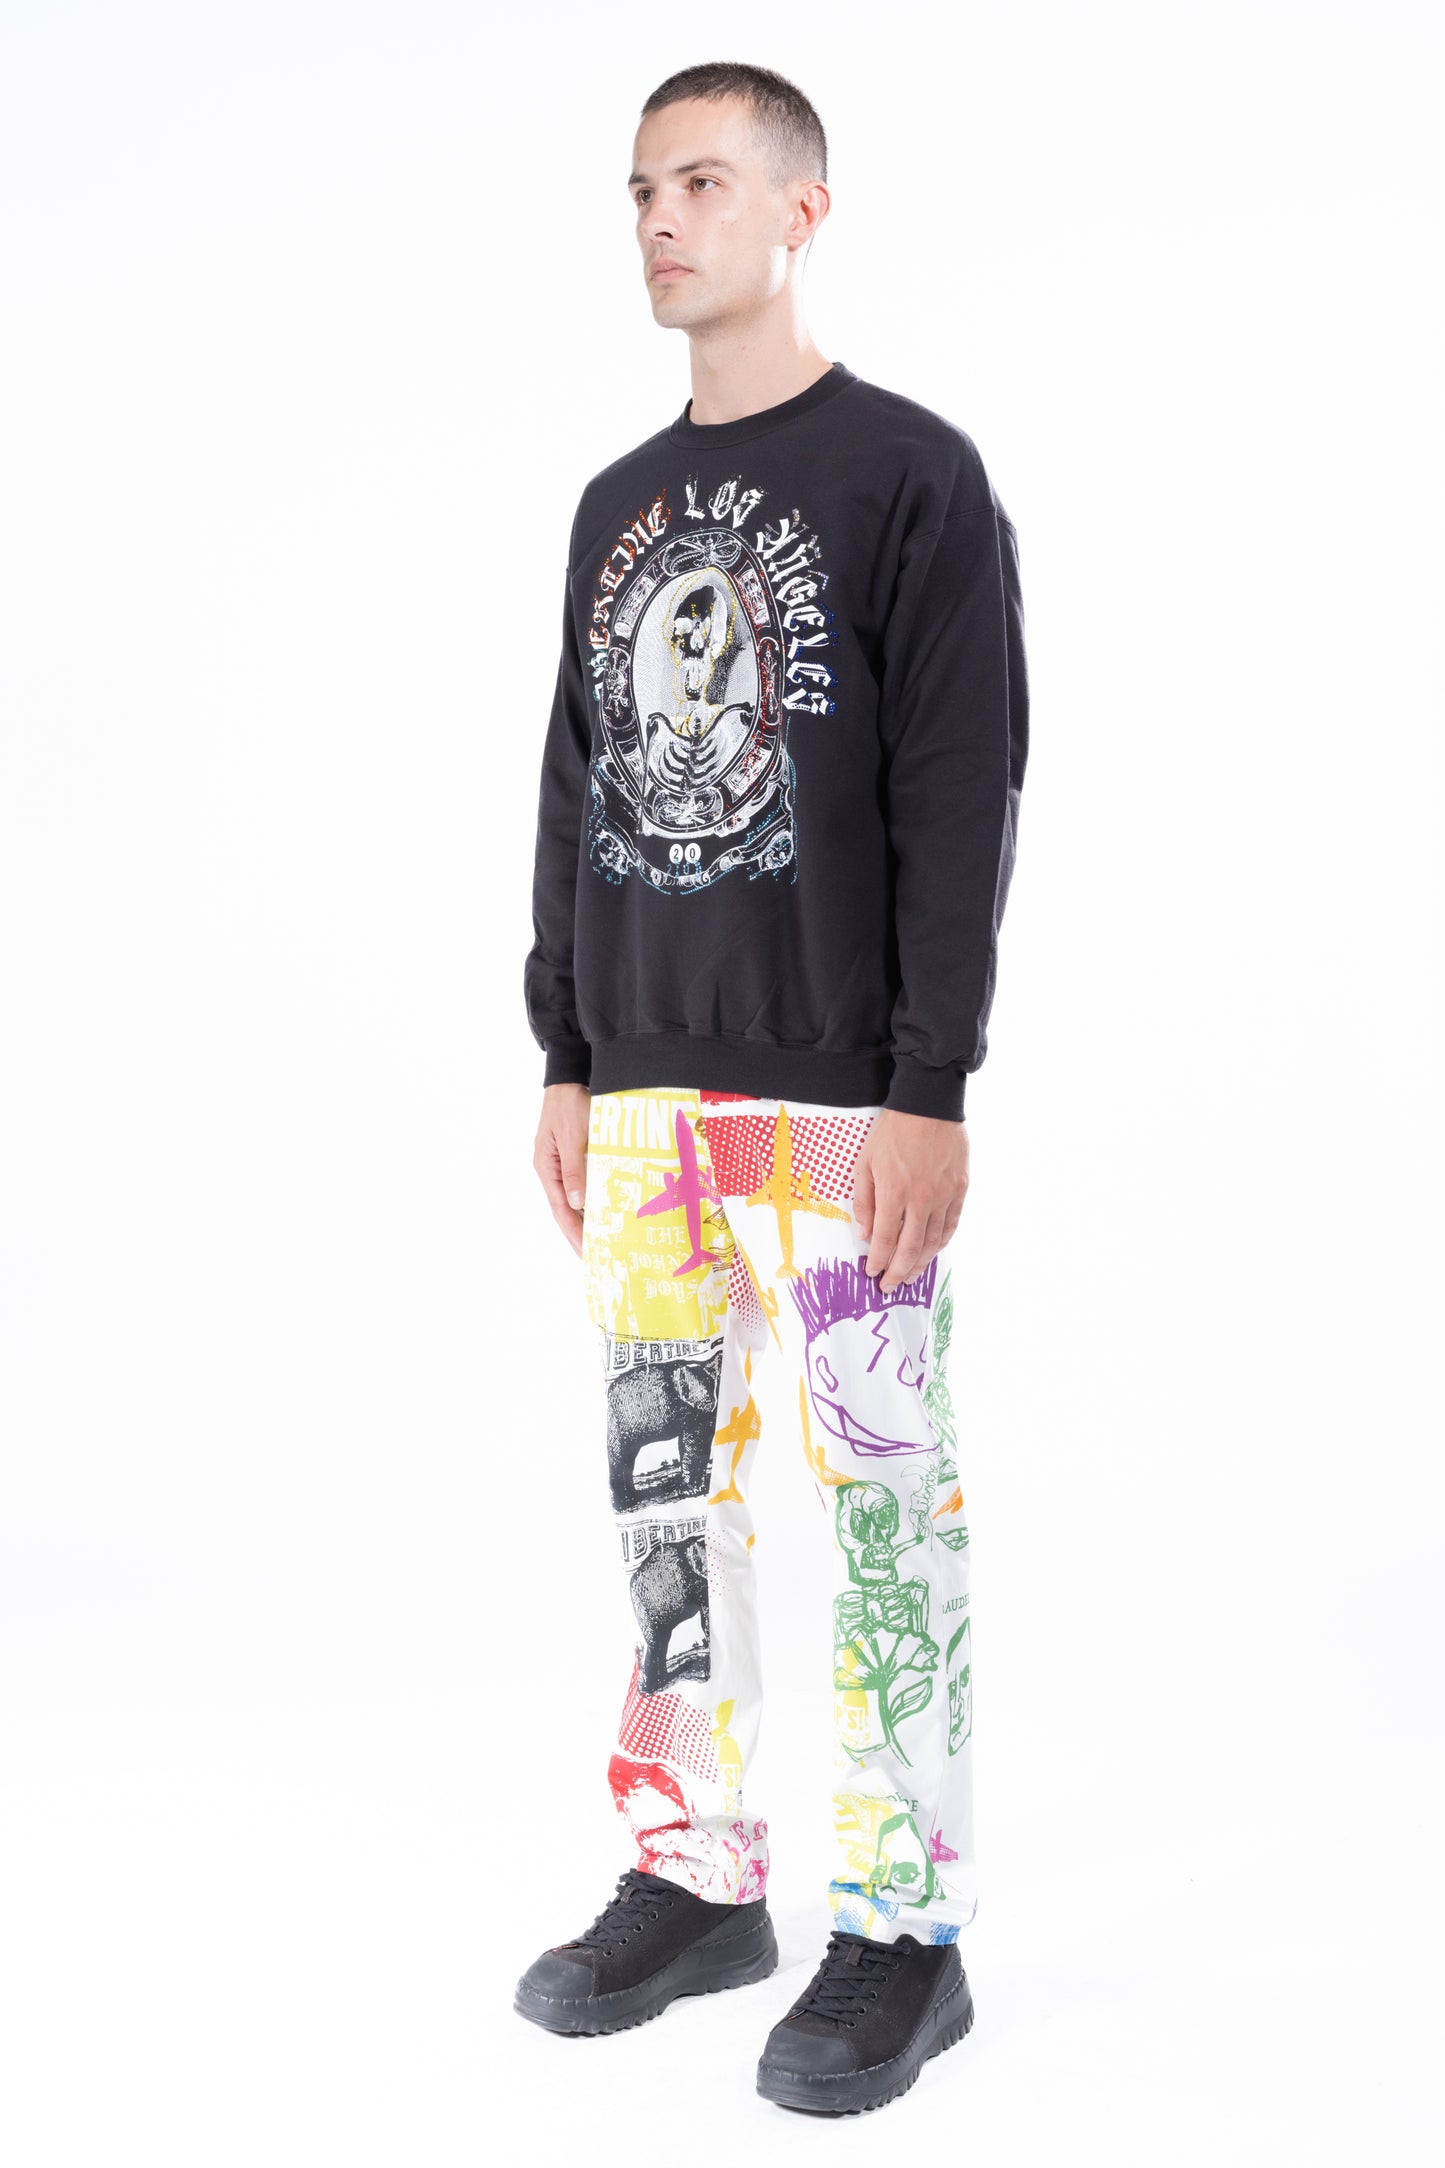 'ASHES TO ASHES WITH CRYSTALS' CREWNECK SWEATSHIRT -  - Libertine